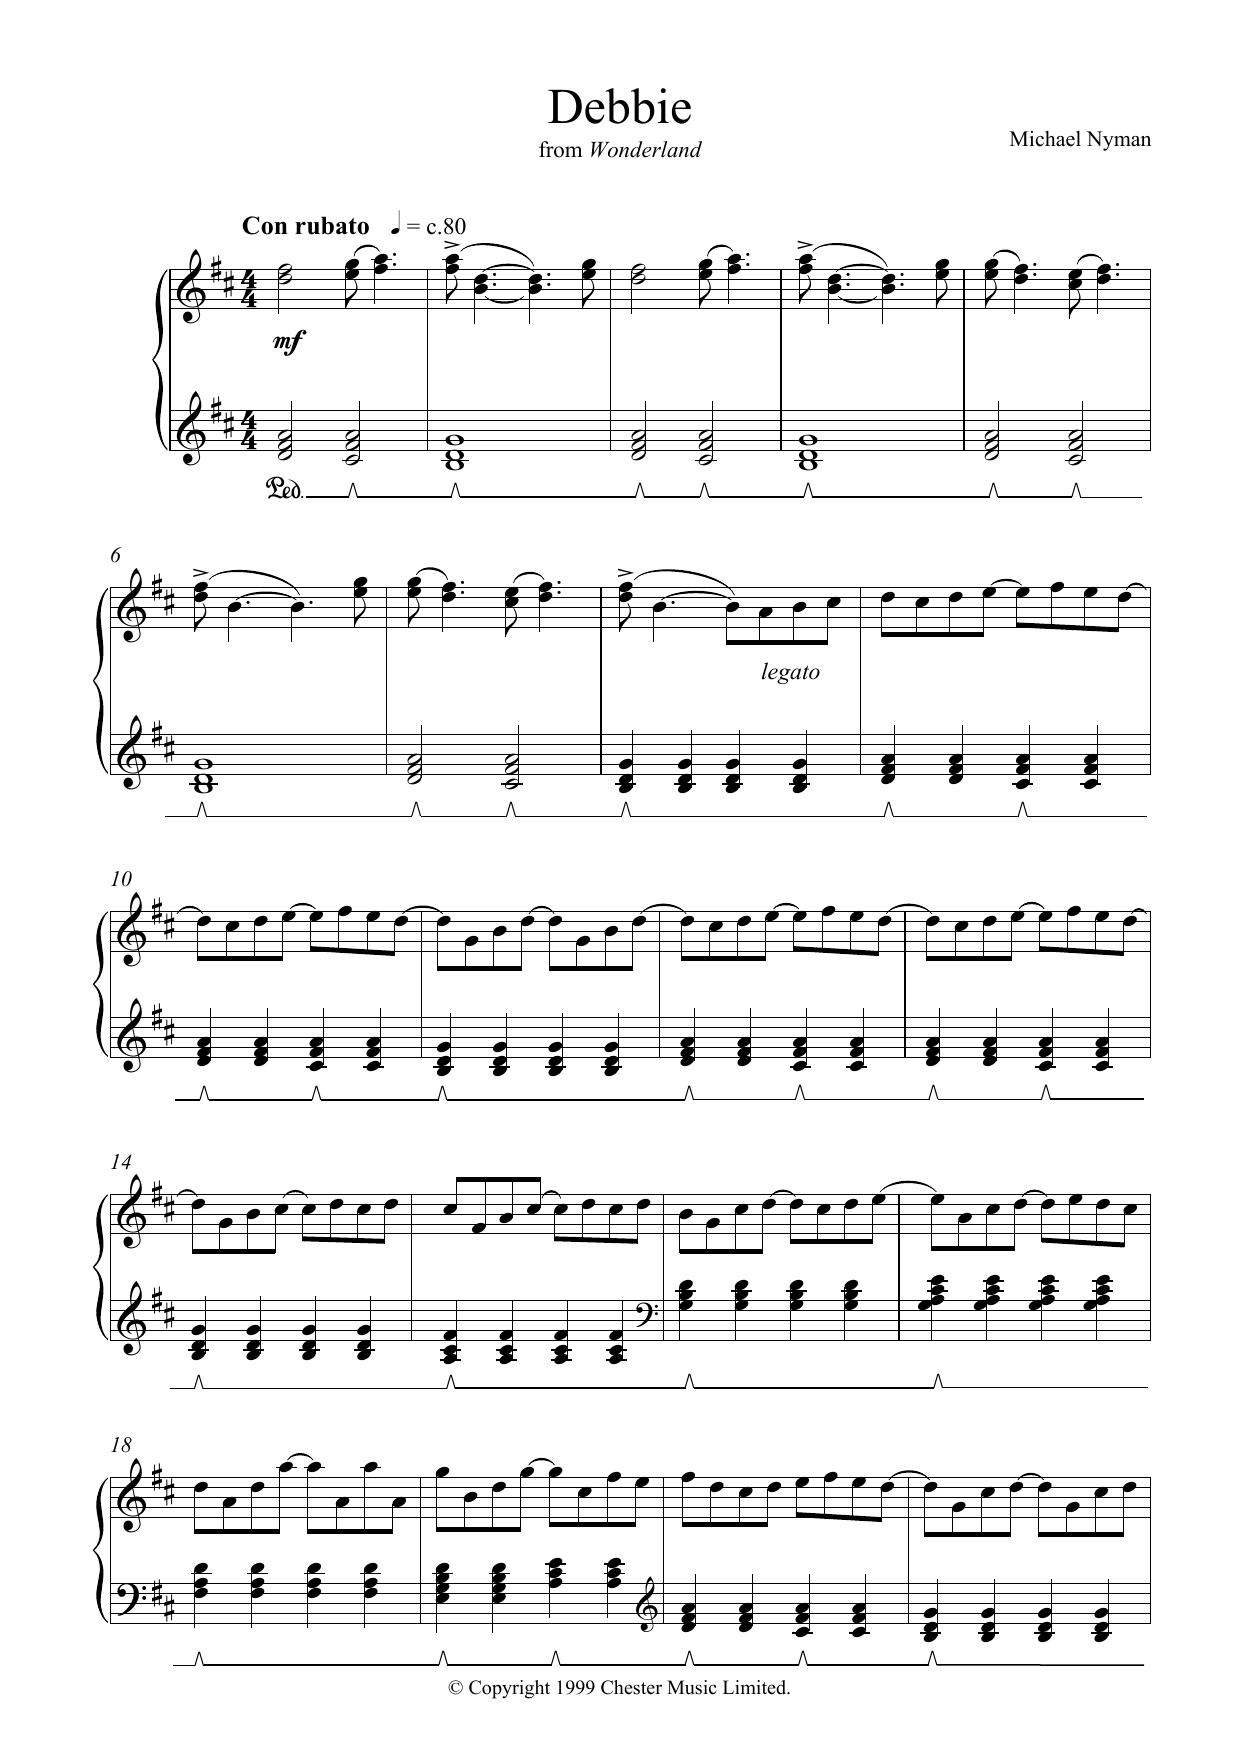 Michael Nyman Debbie (from Wonderland) sheet music notes and chords. Download Printable PDF.